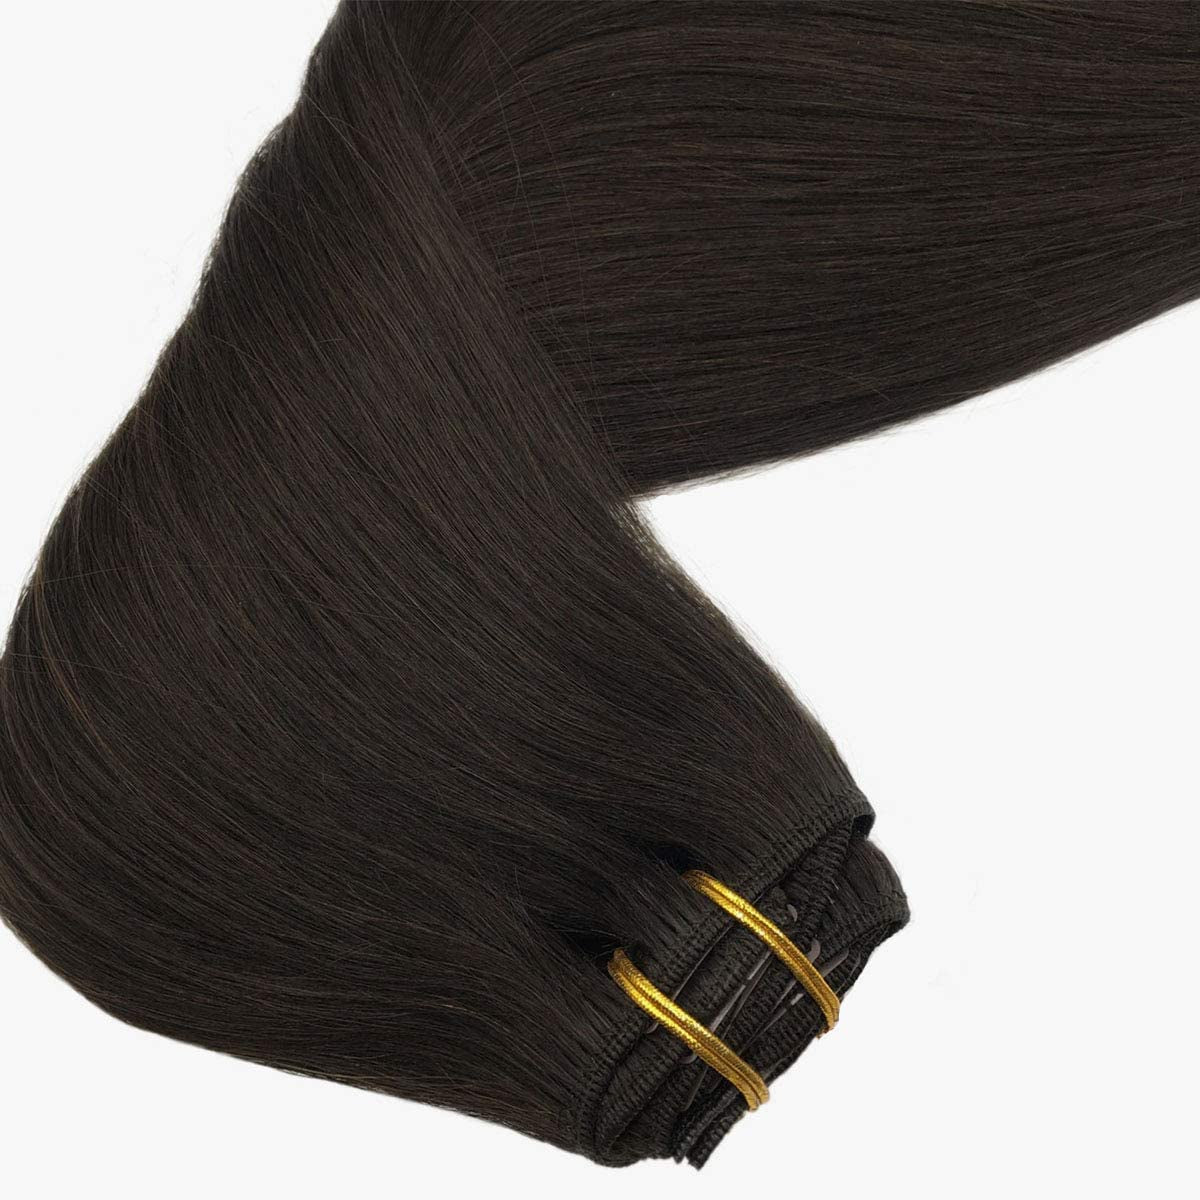 GOO GOO Clip-In Hair Extensions for Women, Soft & Natural, Handmade Real Human Hair Extensions, Dark Brown, Long, Straight #2, 7Pcs 120G 18 Inches